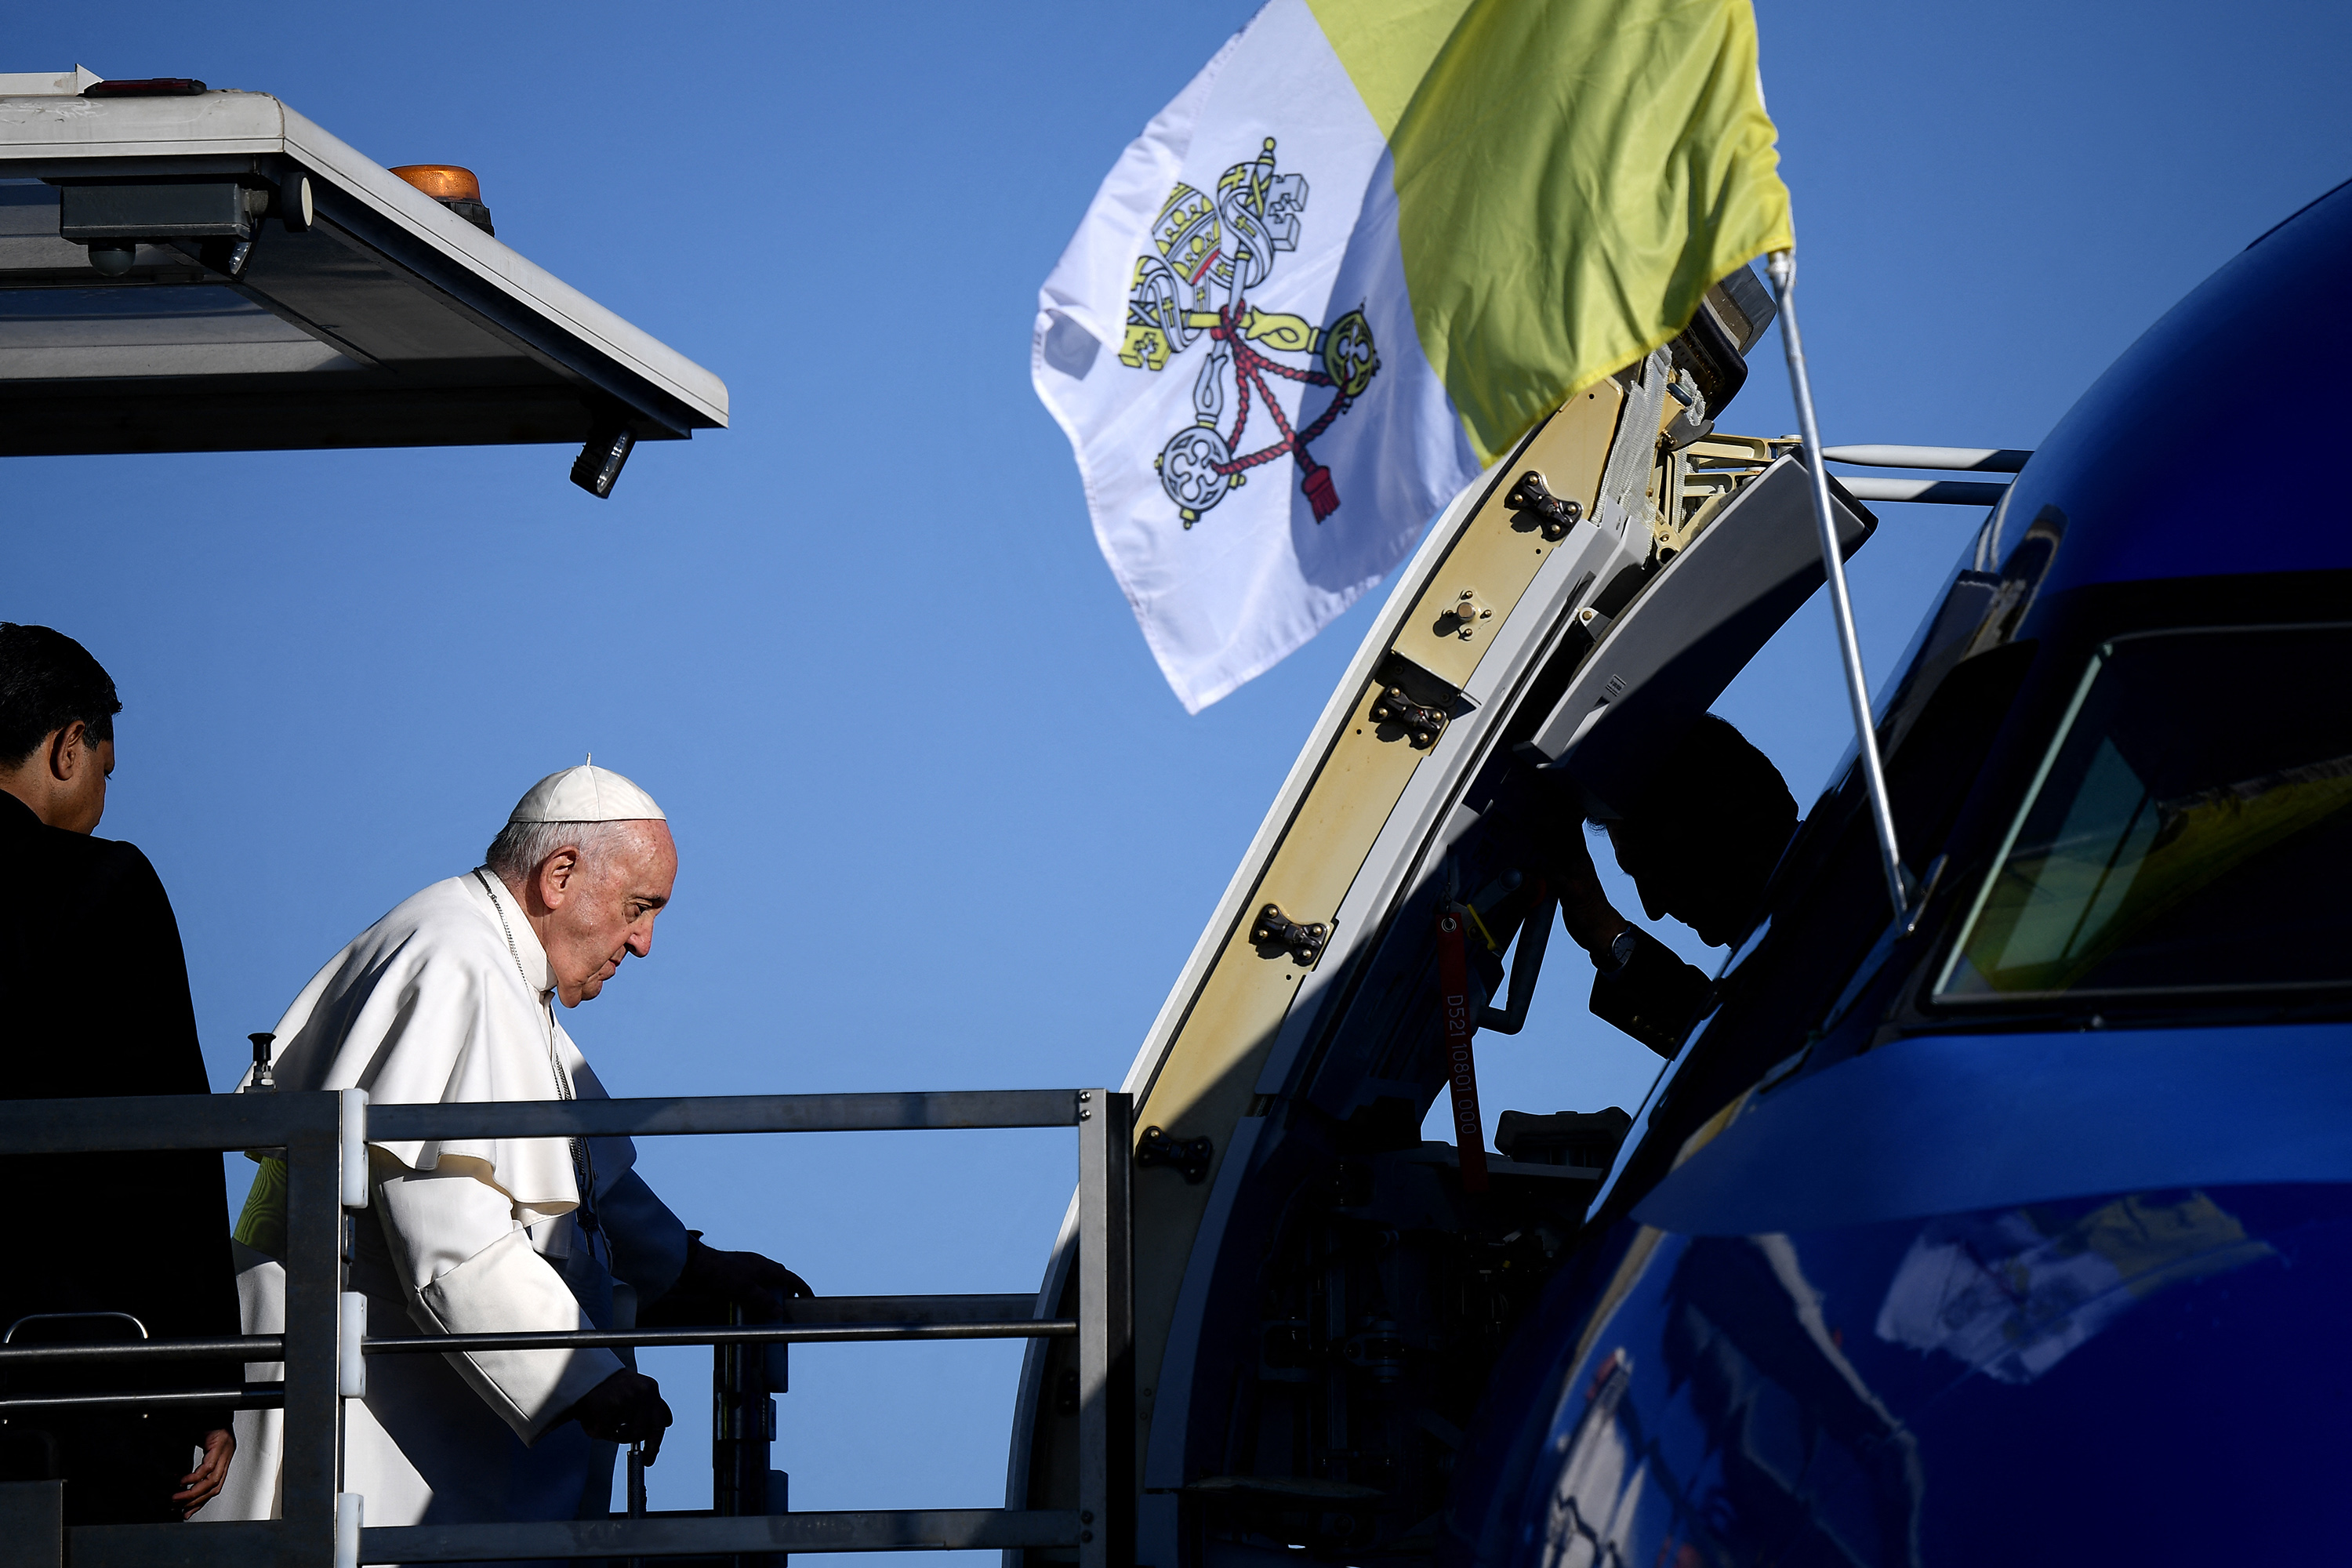 Pope Francis arrives at Rome's Fiumicino airport to board his plane for his trip to Hungary